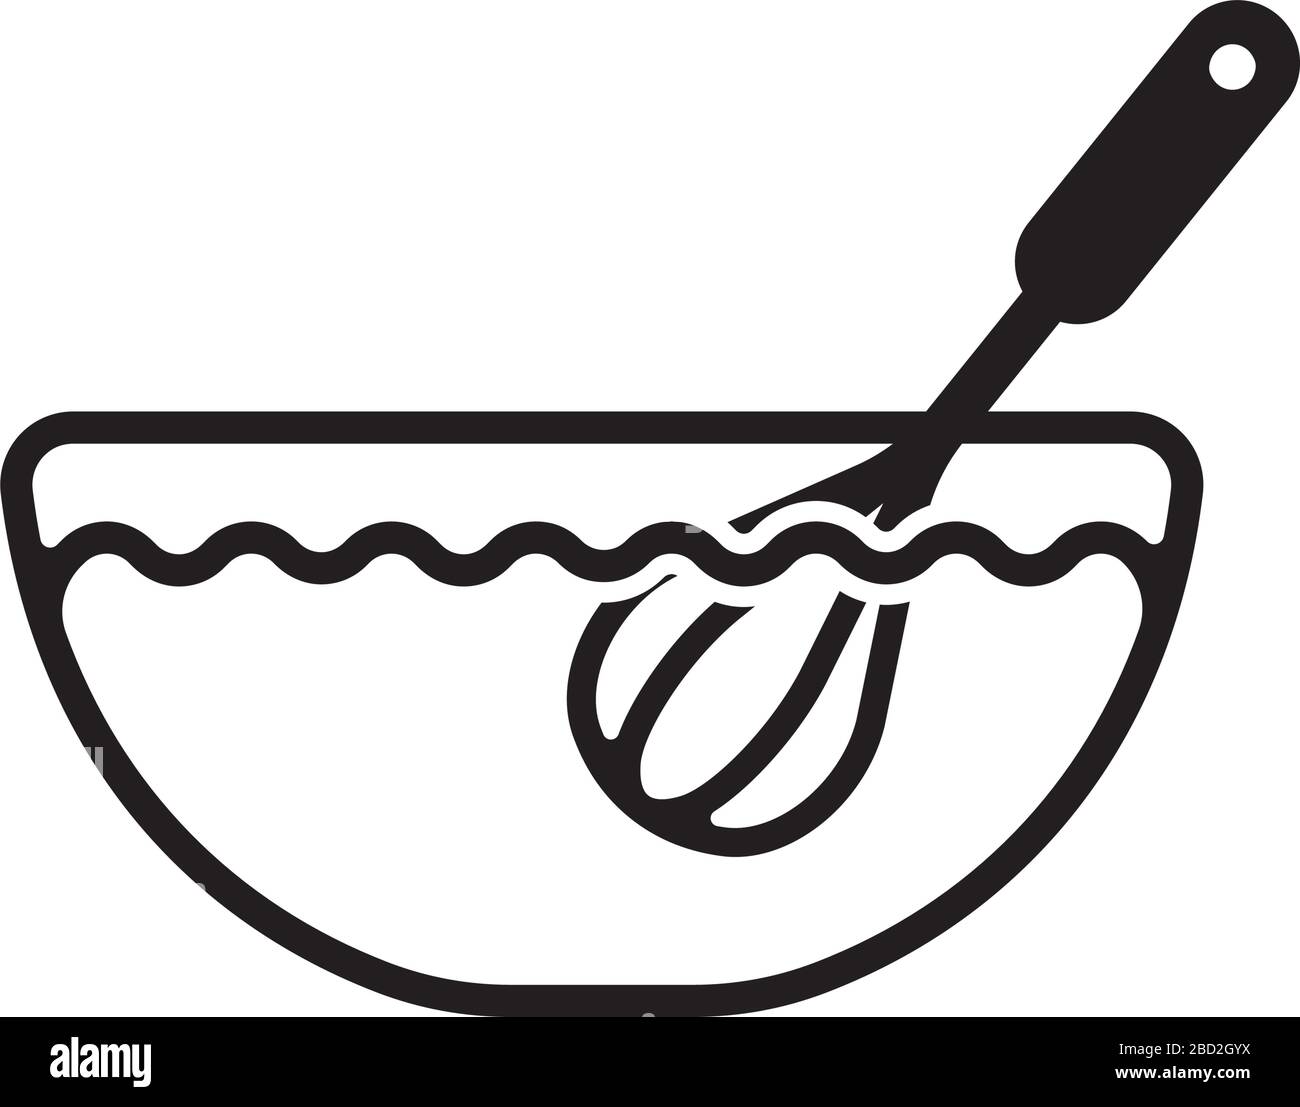 https://c8.alamy.com/comp/2BD2GYX/cooking-icon-whisk-icon-mix-or-whip-ingredients-in-a-bowl-2BD2GYX.jpg